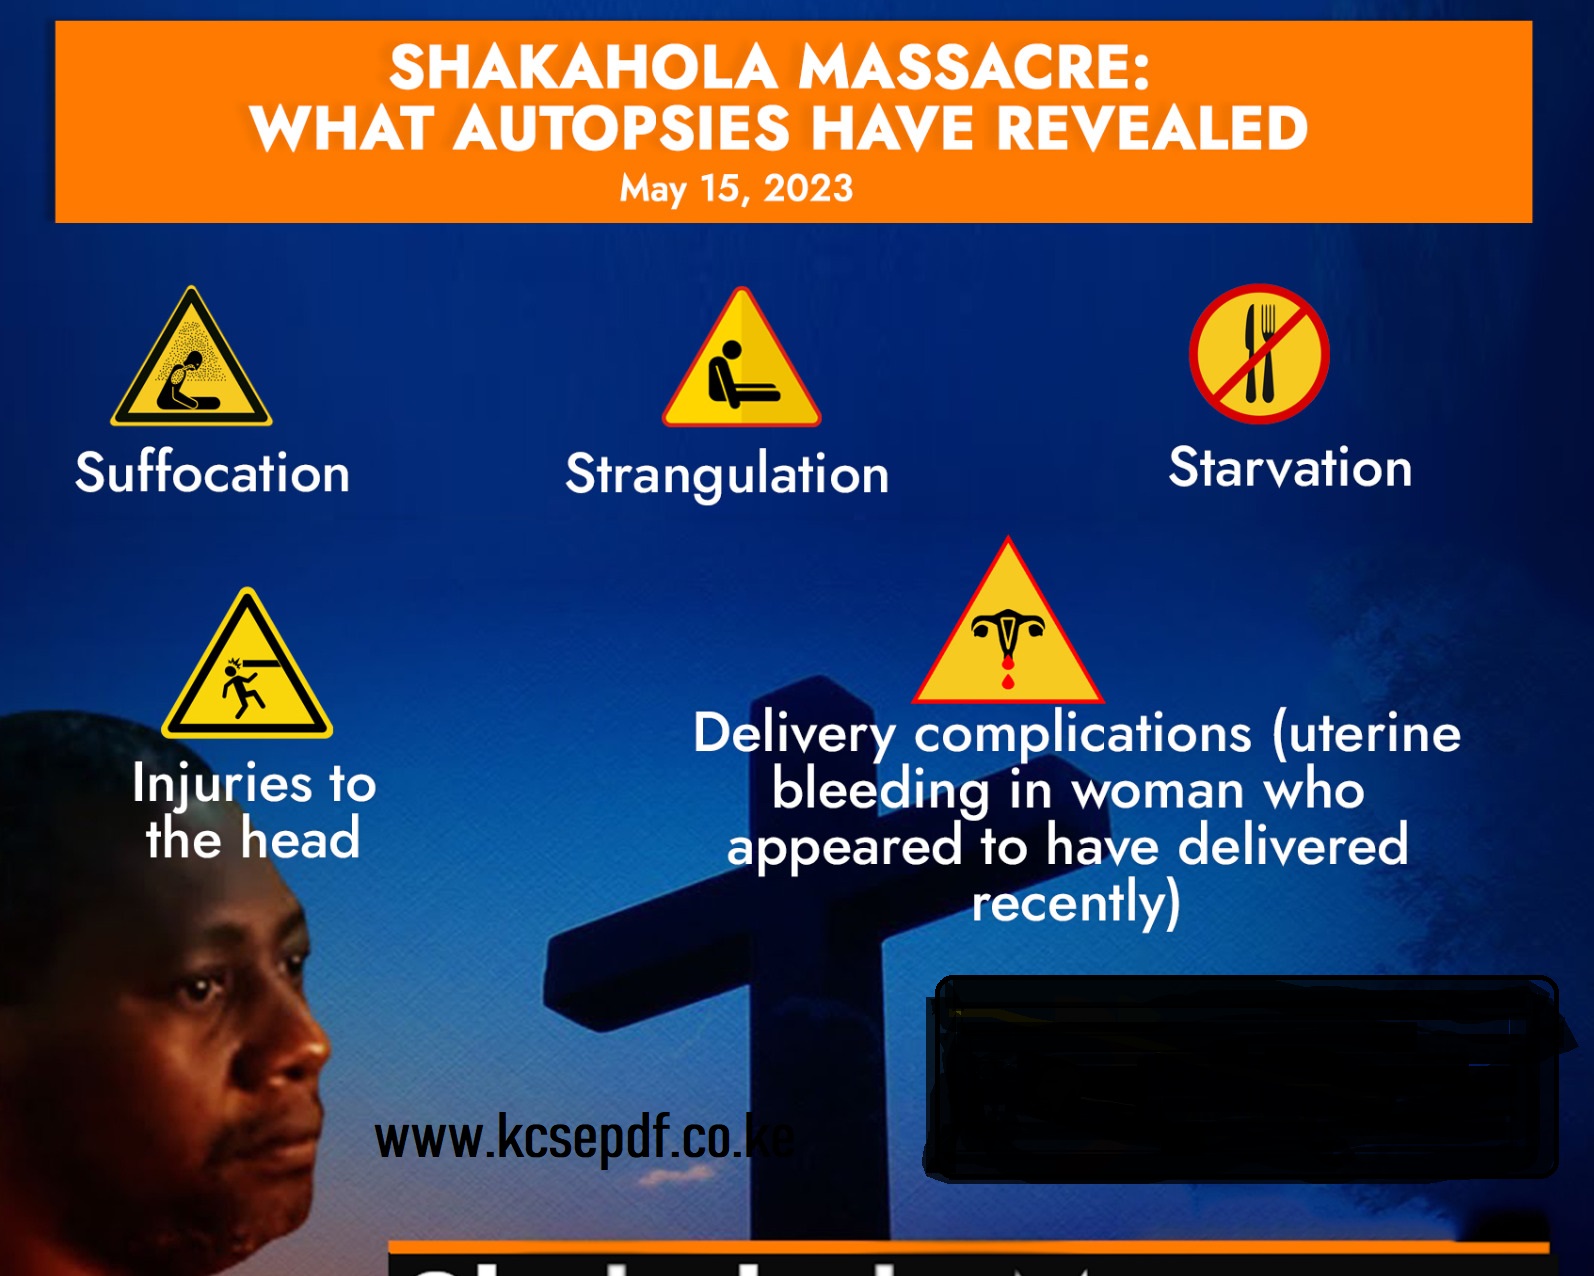 causes of shakahola deaths